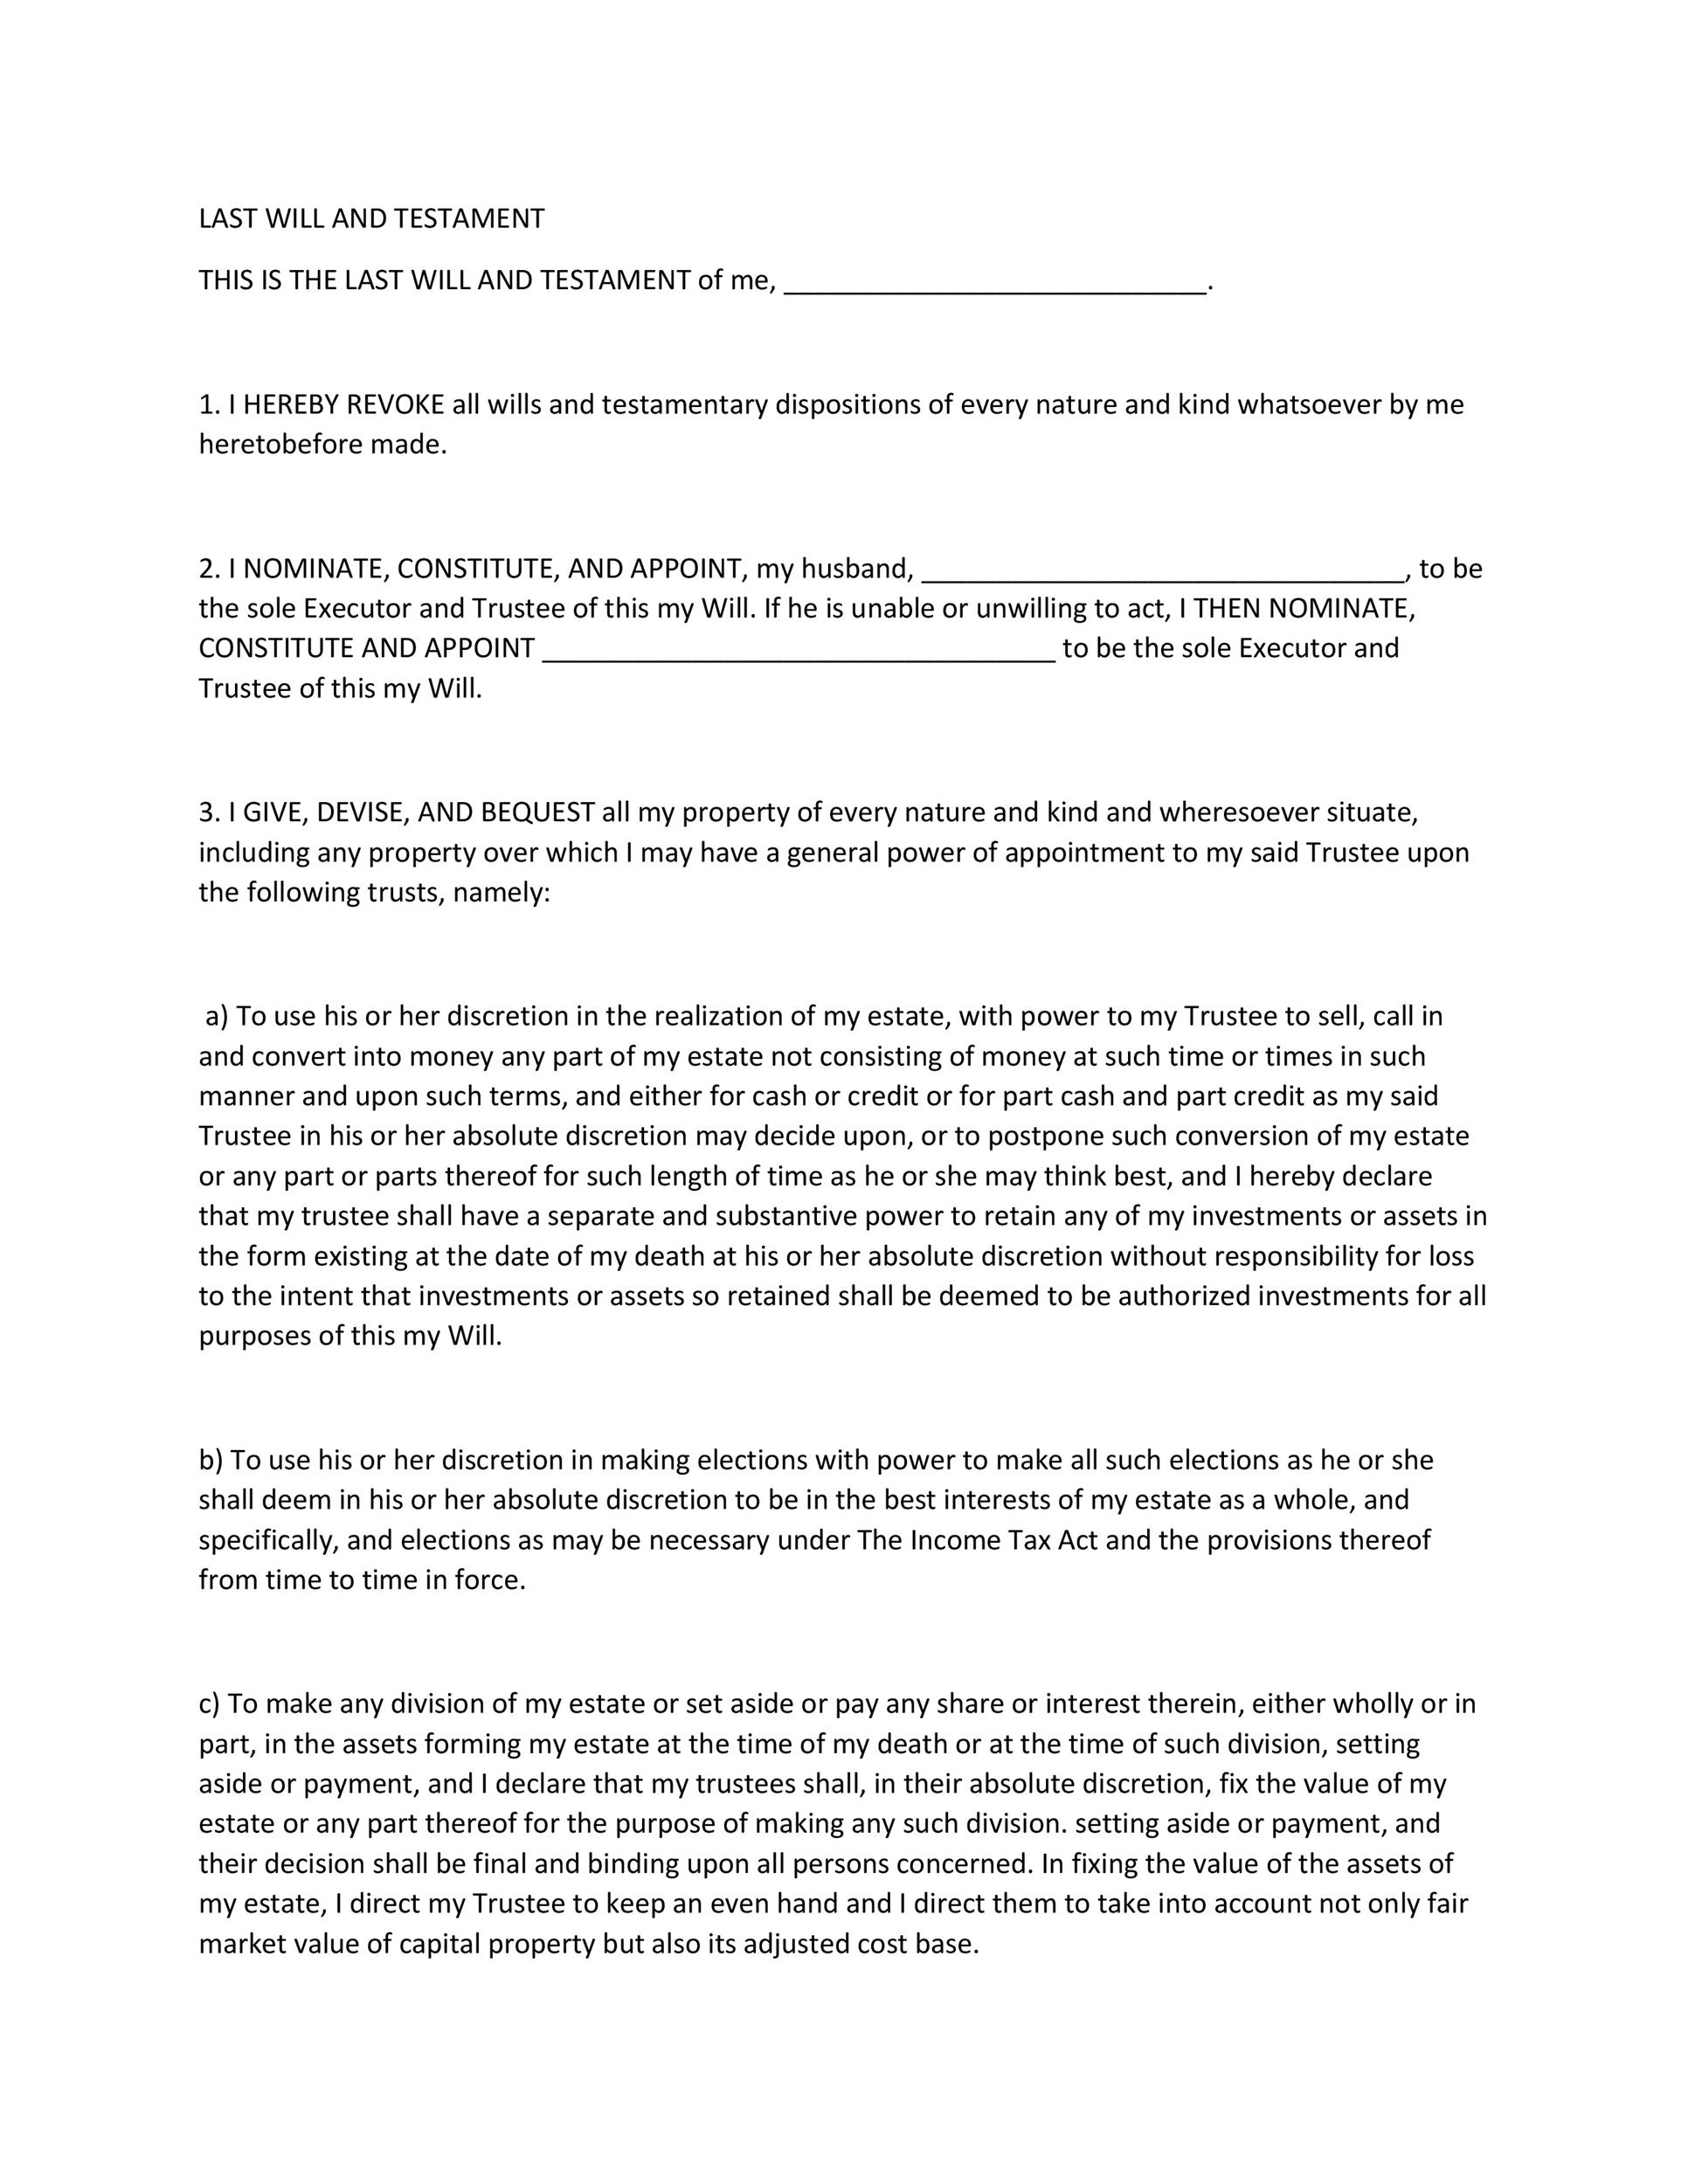 Free Last will and testament template 08